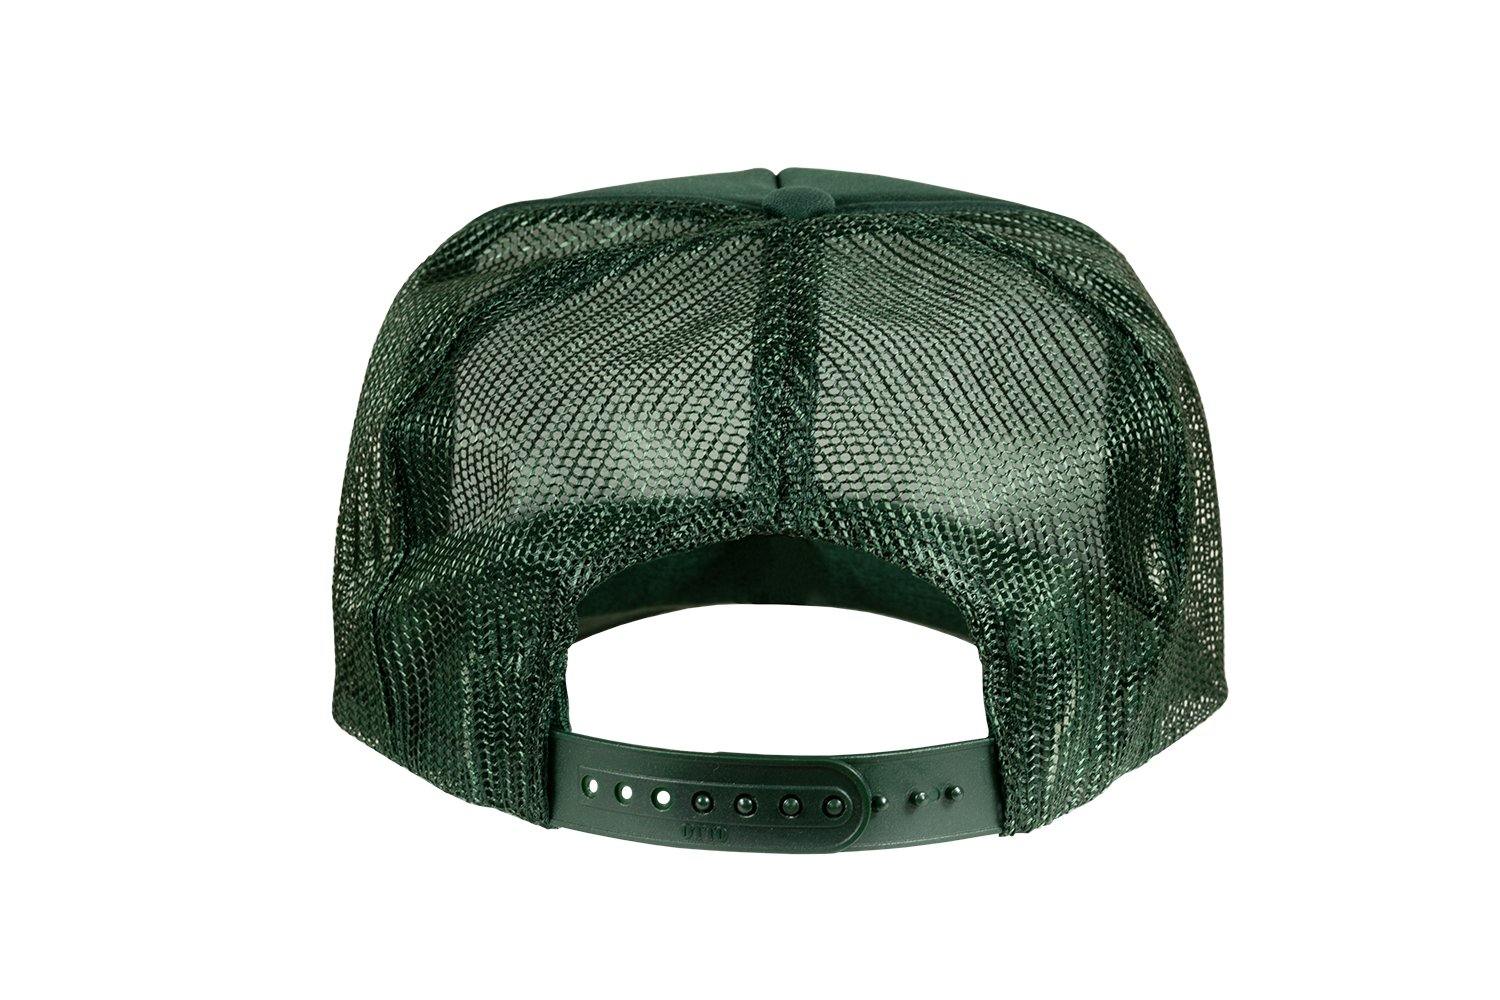 G'Day high crown trucker cap with mesh back and snapback  - Tropic Trucker Australia®